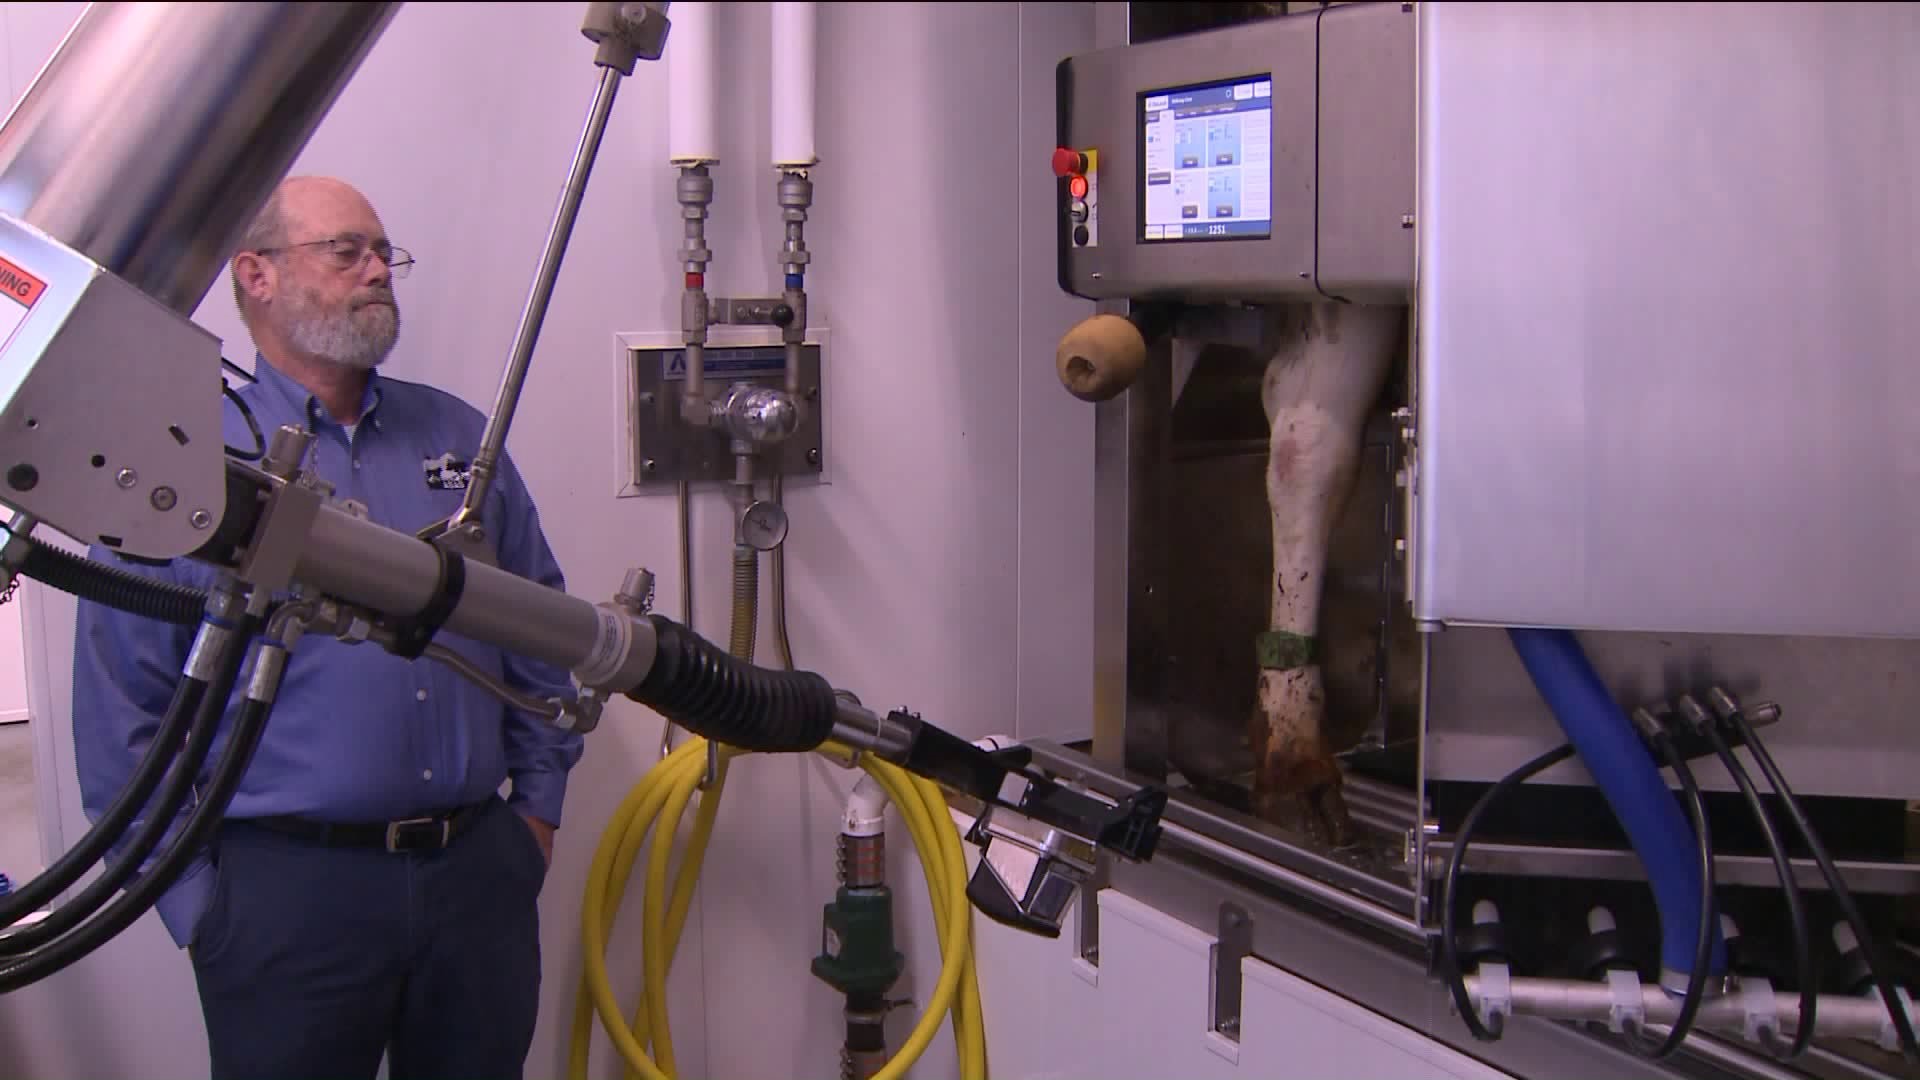 Robots are changing the way we milk cows